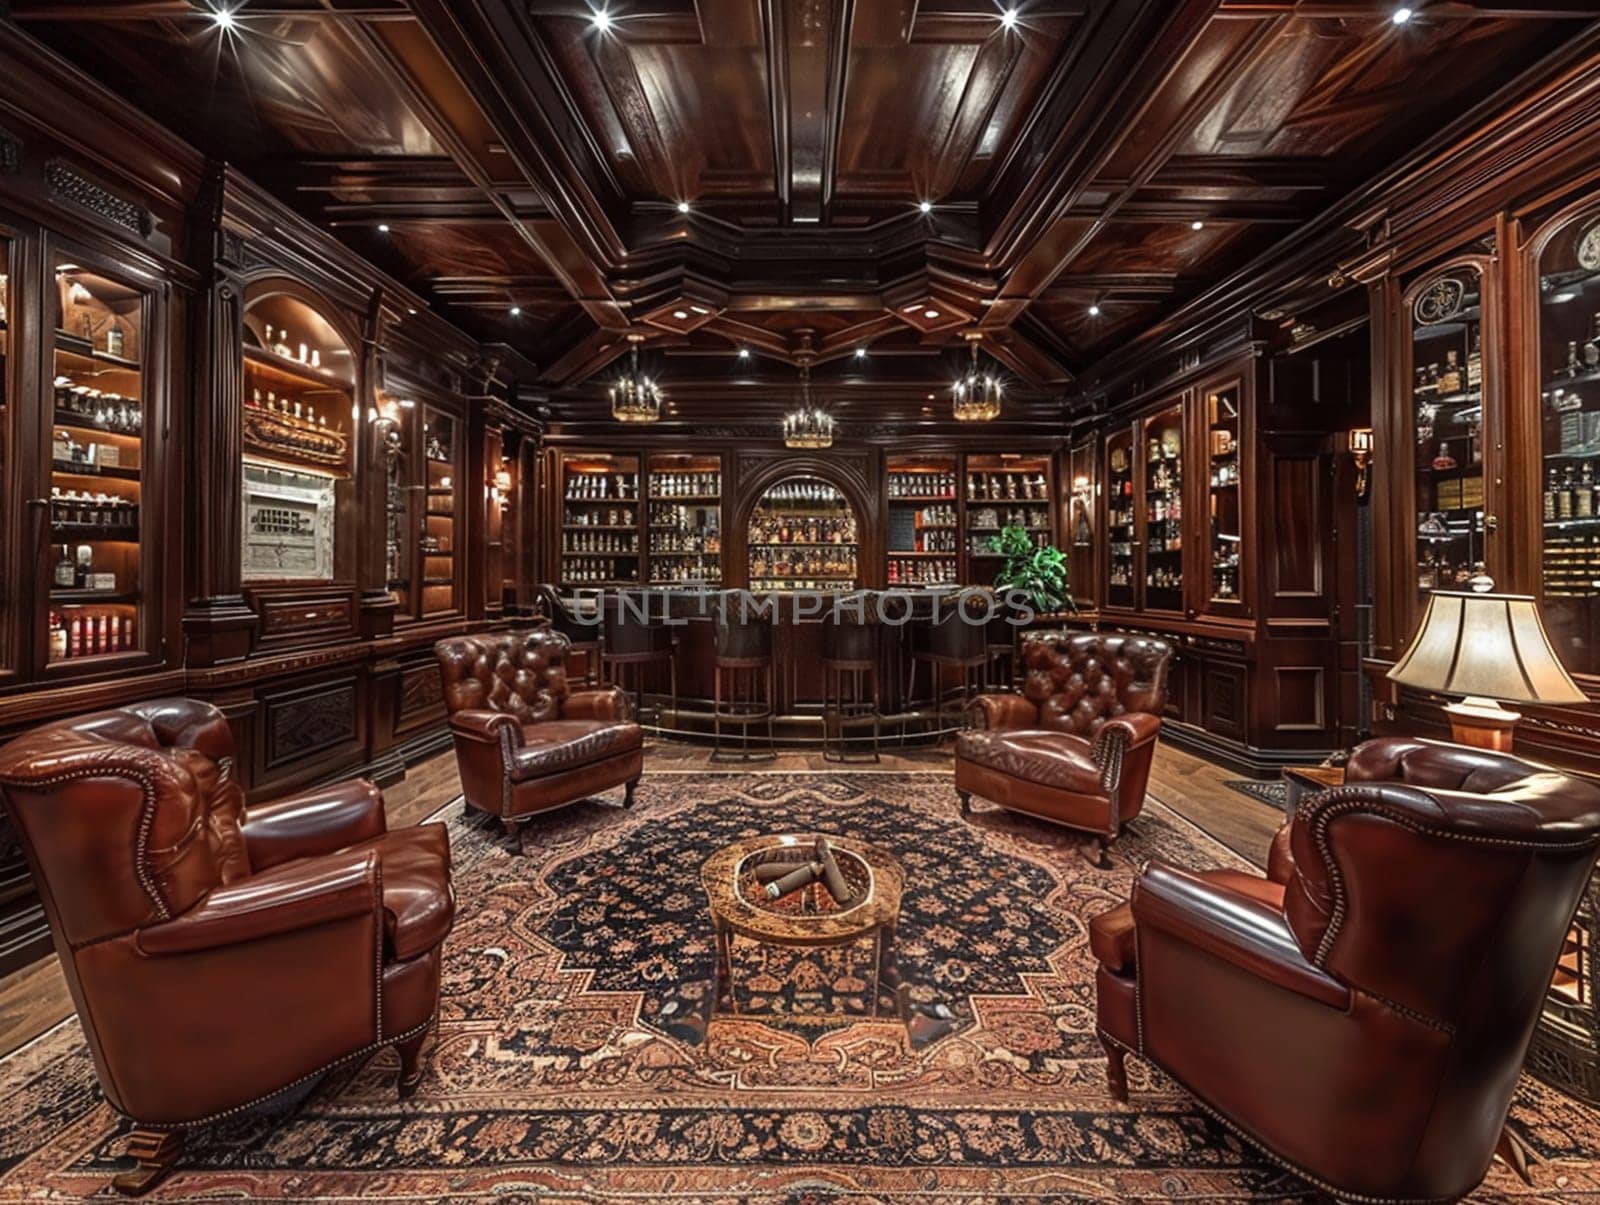 Sophisticated cigar lounge with rich leather chairs and wood accents